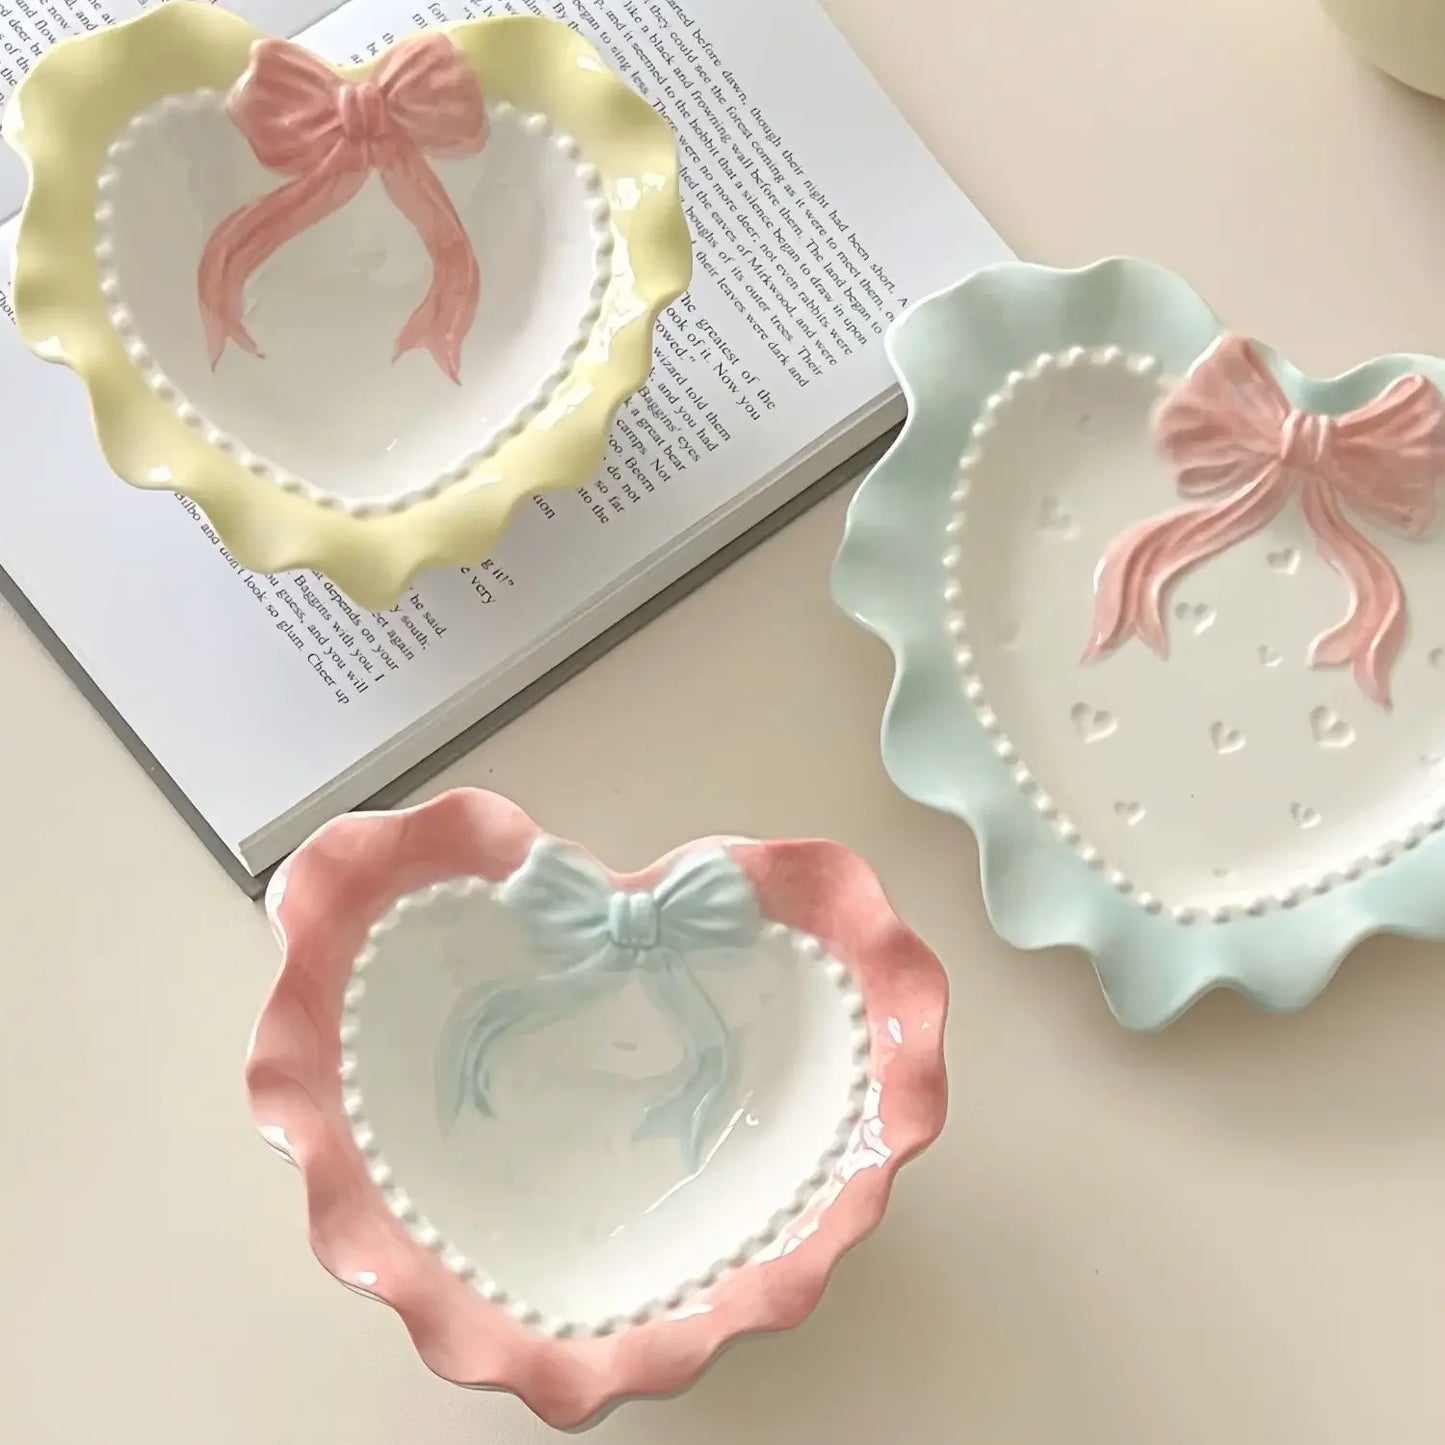 INS Wind Bowl Plate Cute Wave Edge Bow Knot Love Wave Dot Ceramic Lace Tableware Girl Heart Home Rice Bowl Plate Dessert Plate